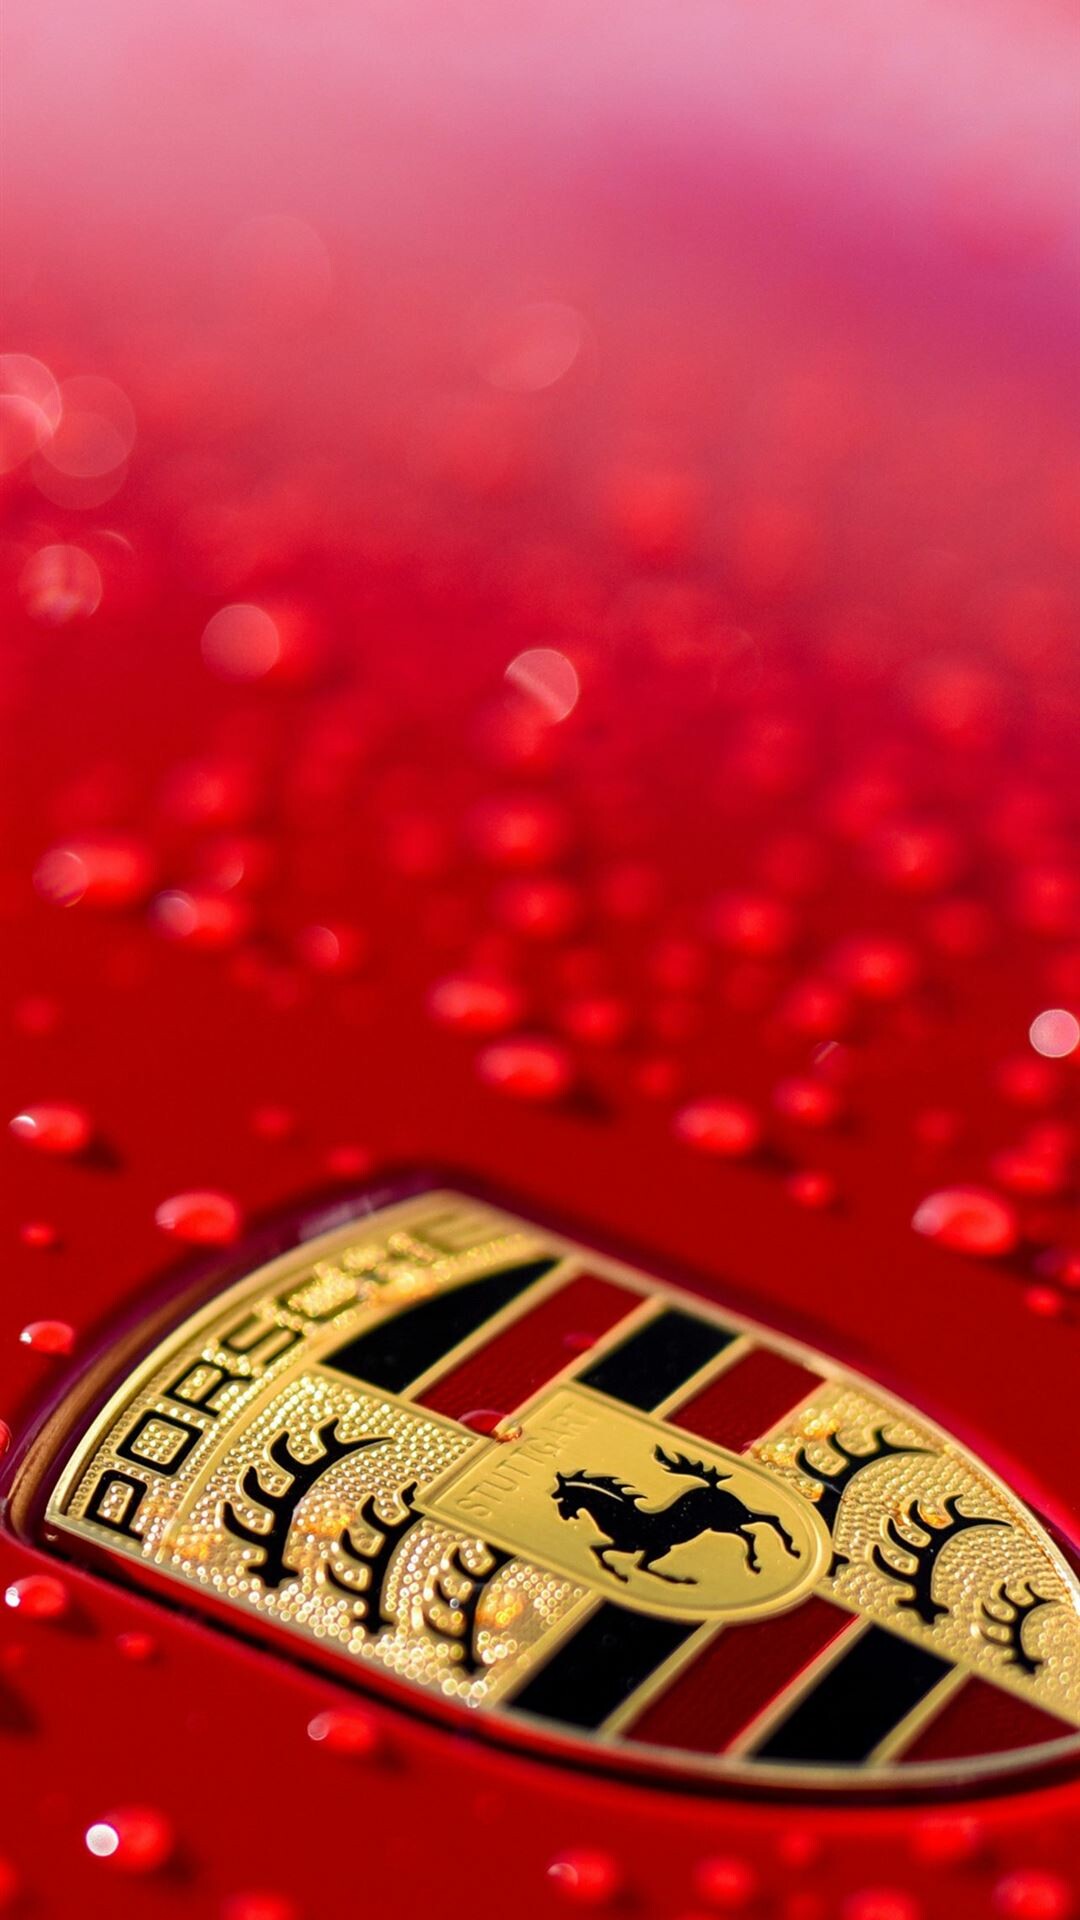 Porsche: Company logo, The old design of the arms of Wurttemberg. 1080x1920 Full HD Wallpaper.